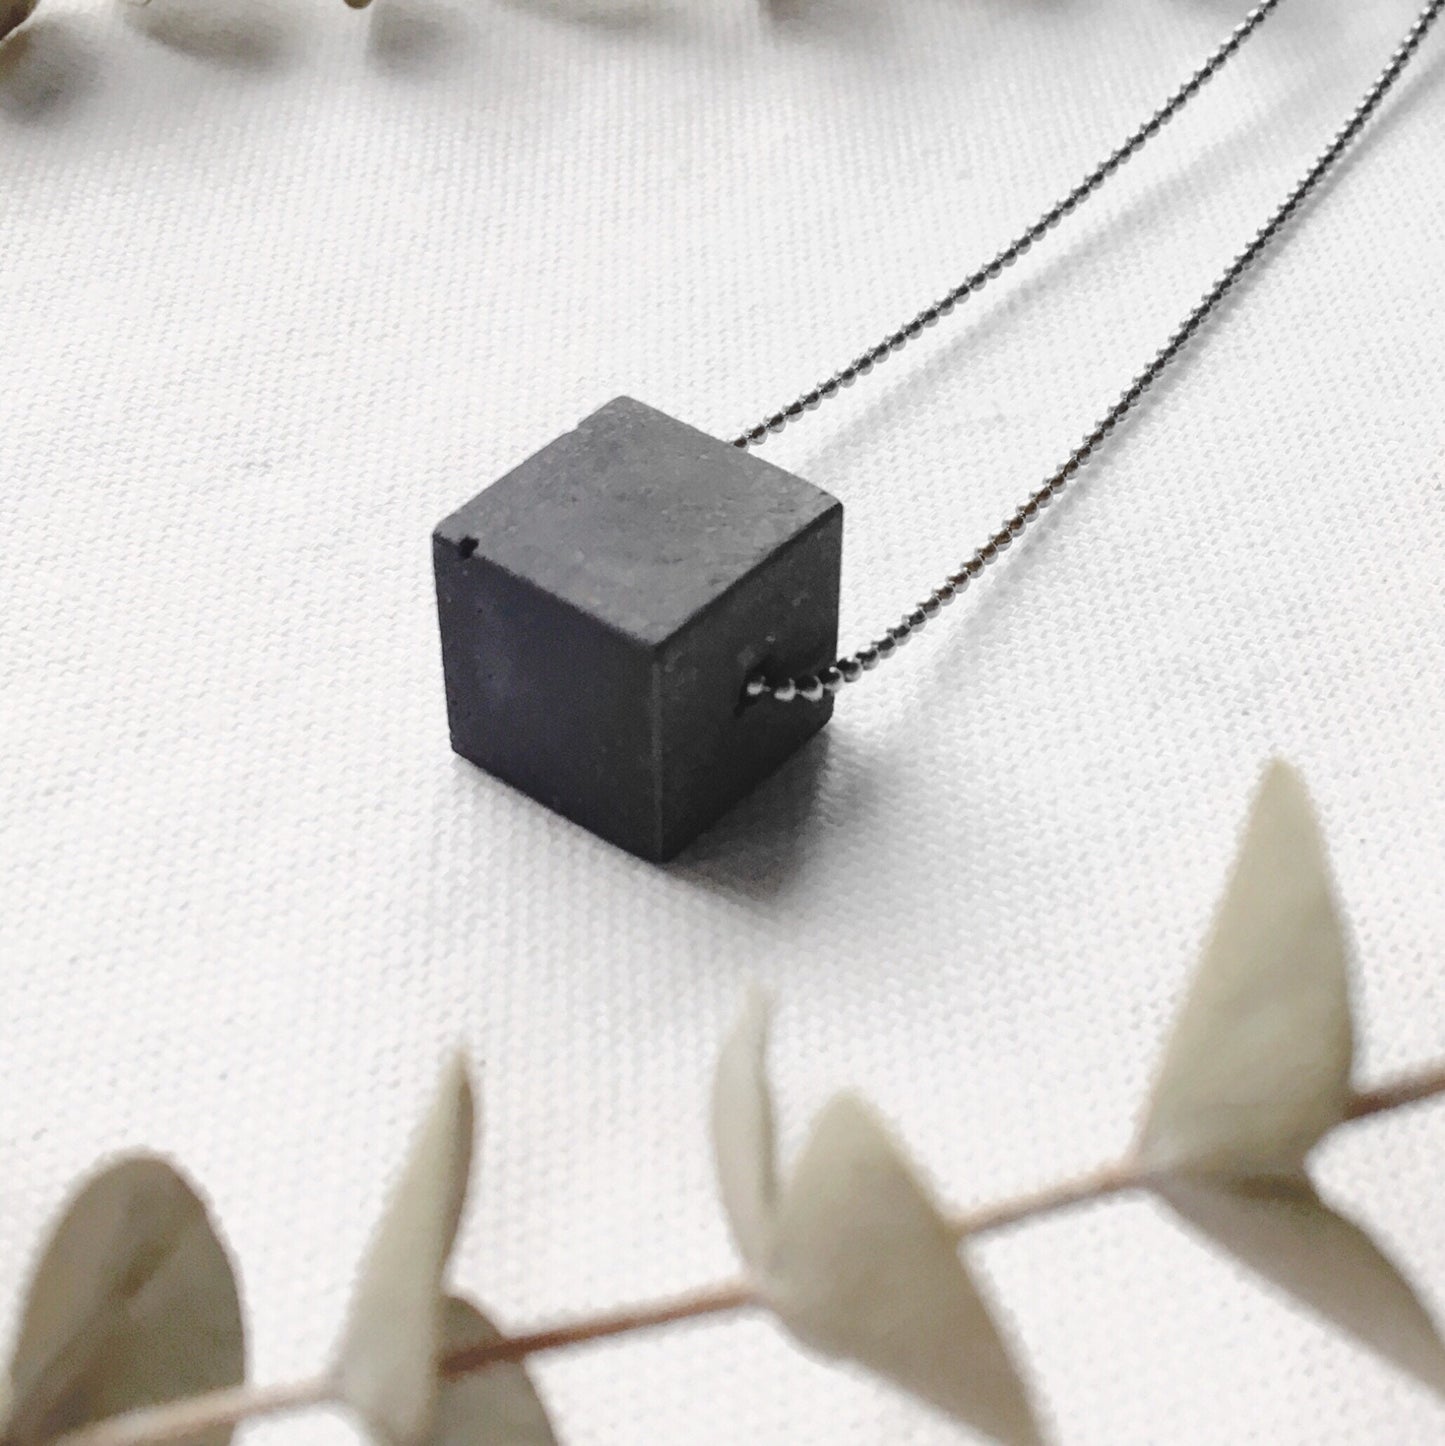 Concrete necklace | concrete jewelry | concrete cube 12mm | minimalist necklace | stainless steel ball chain | brass ball chain